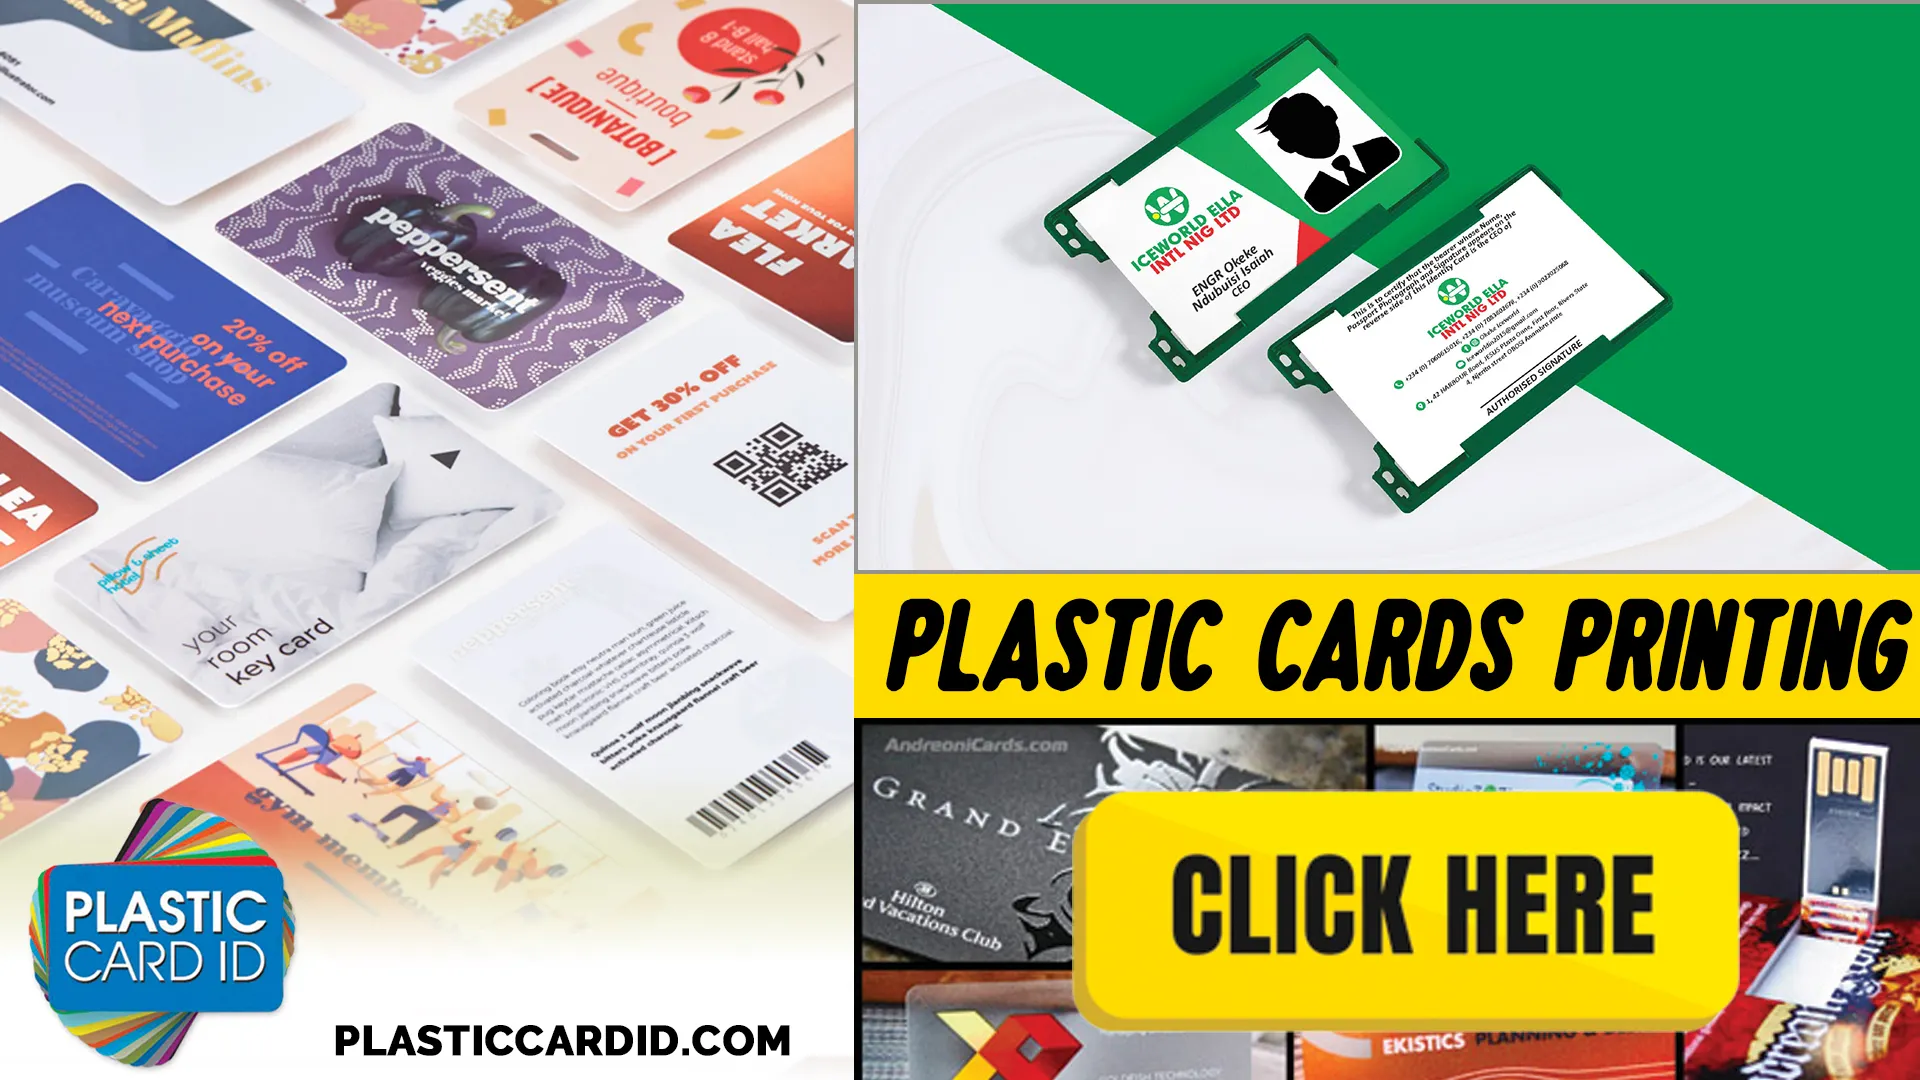 Building Ribbon Knowledge with Plastic Card ID
